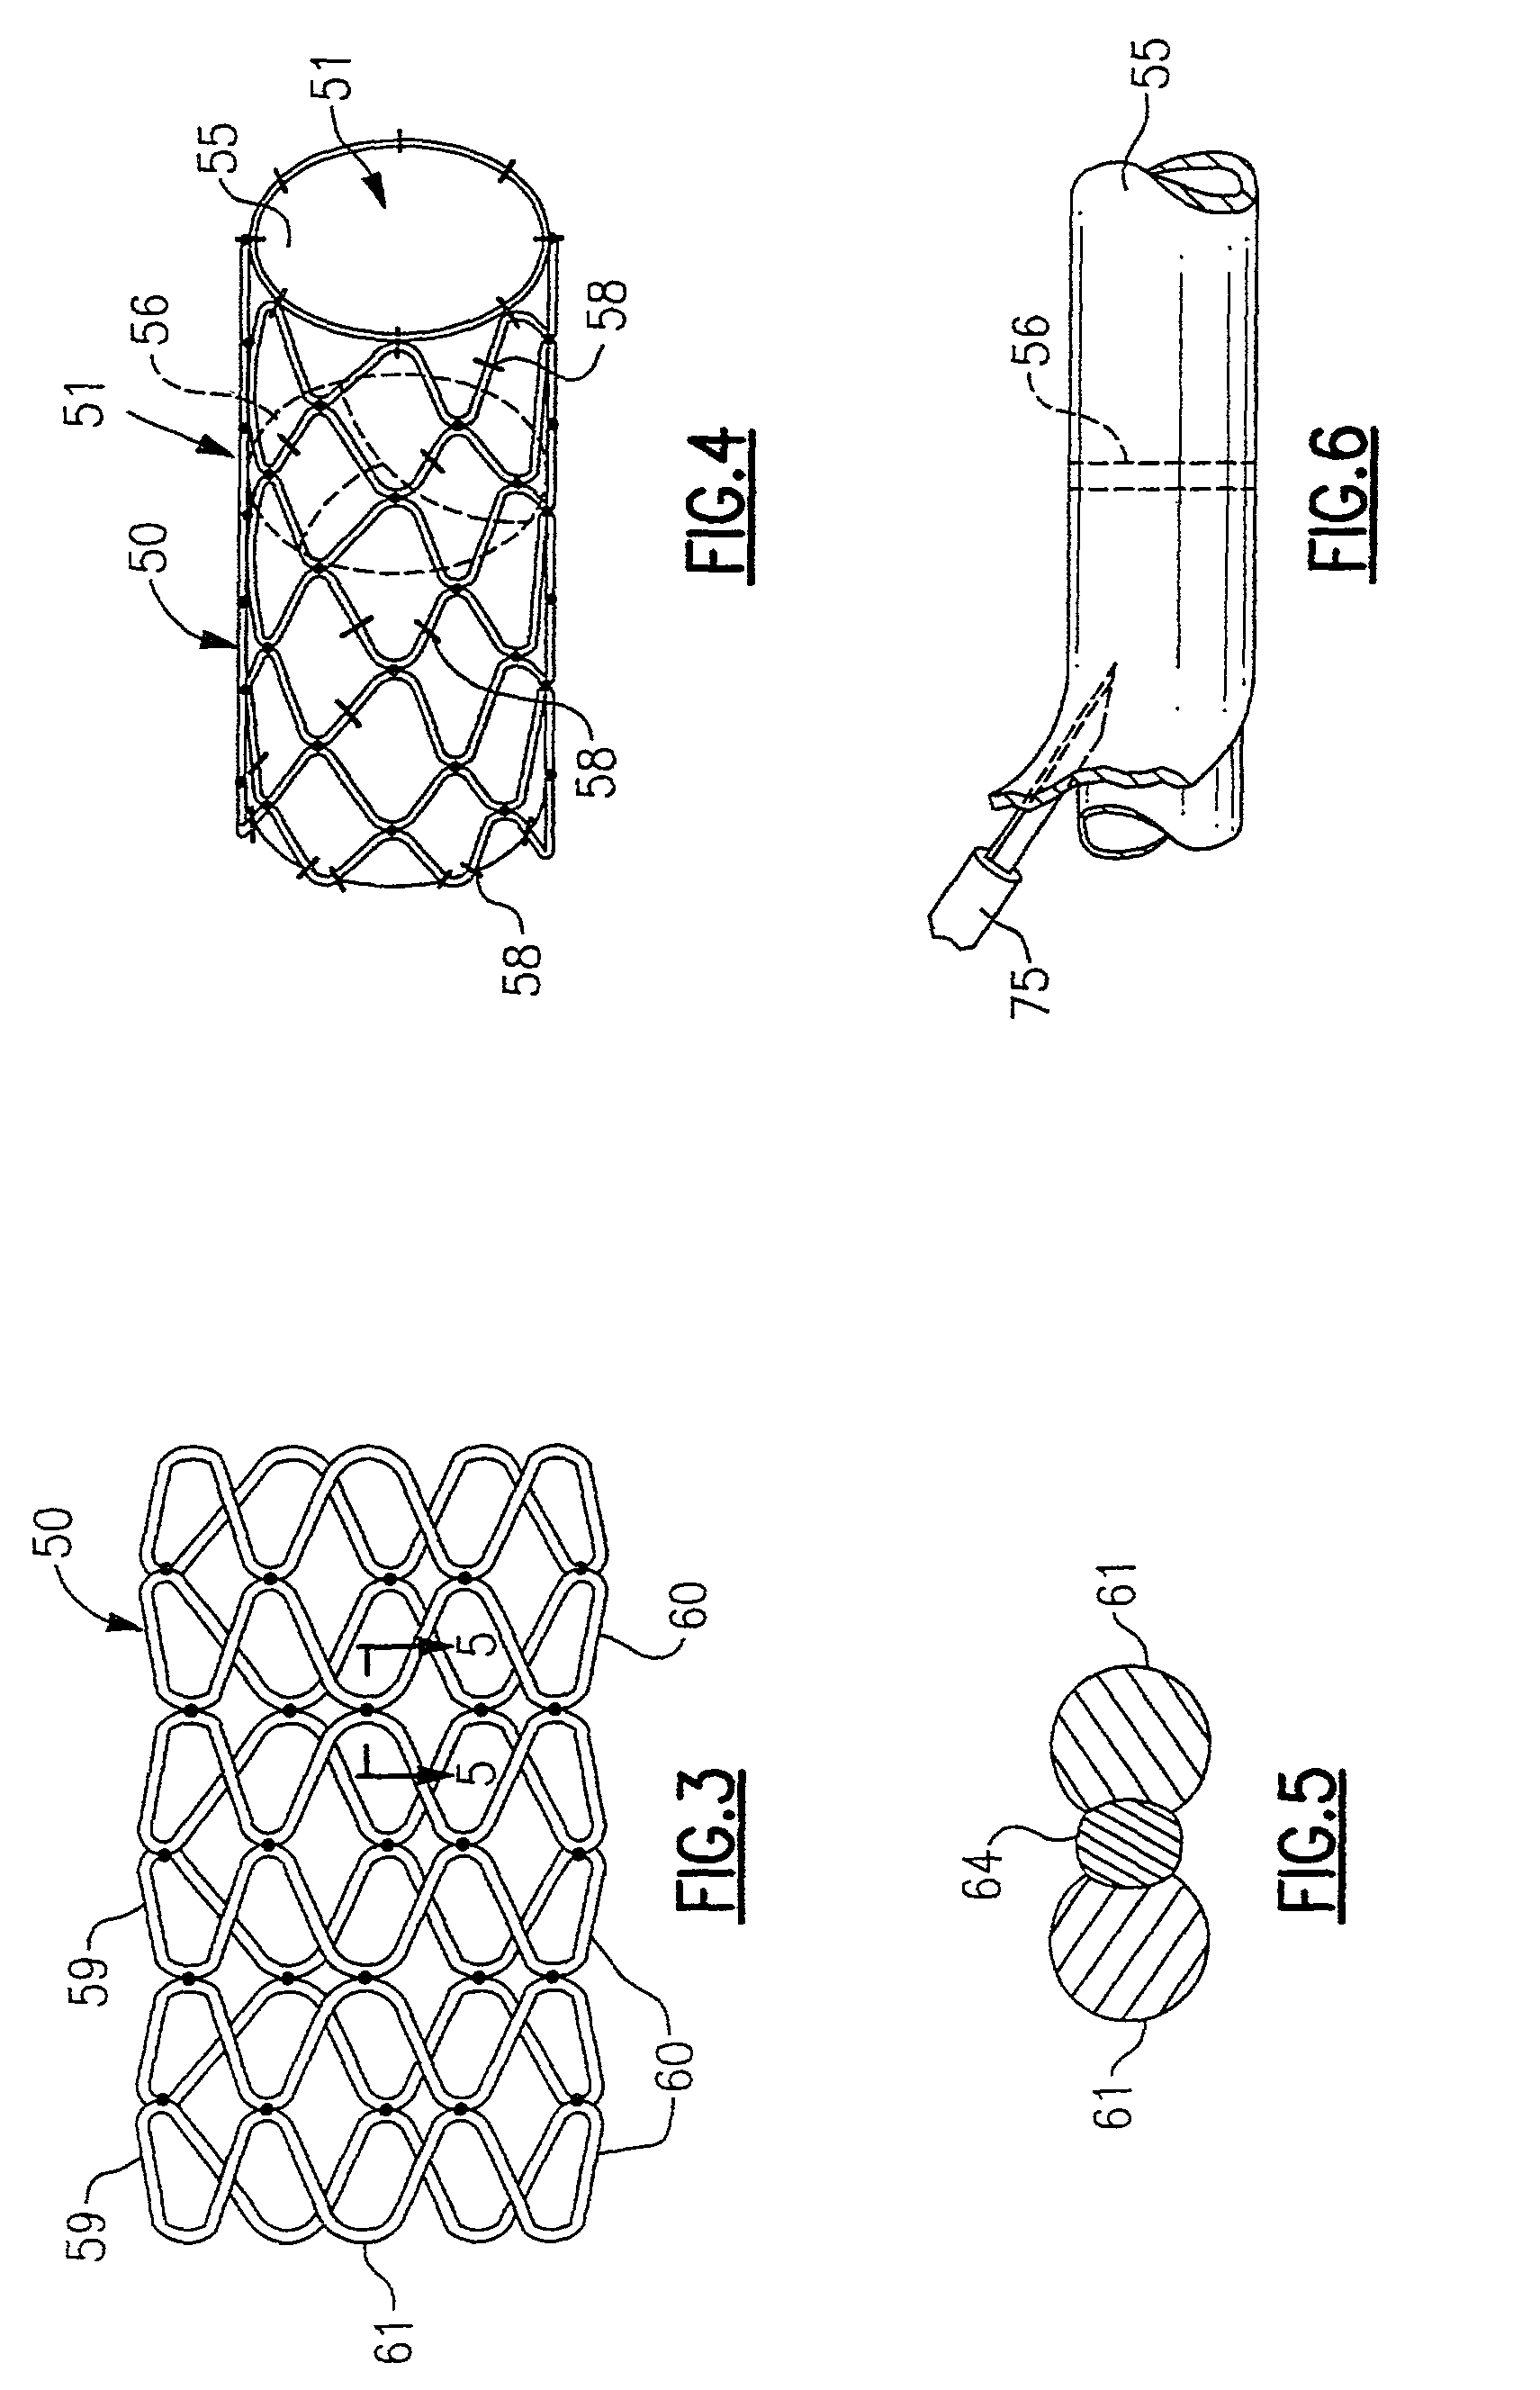 System for implanting a replacement valve